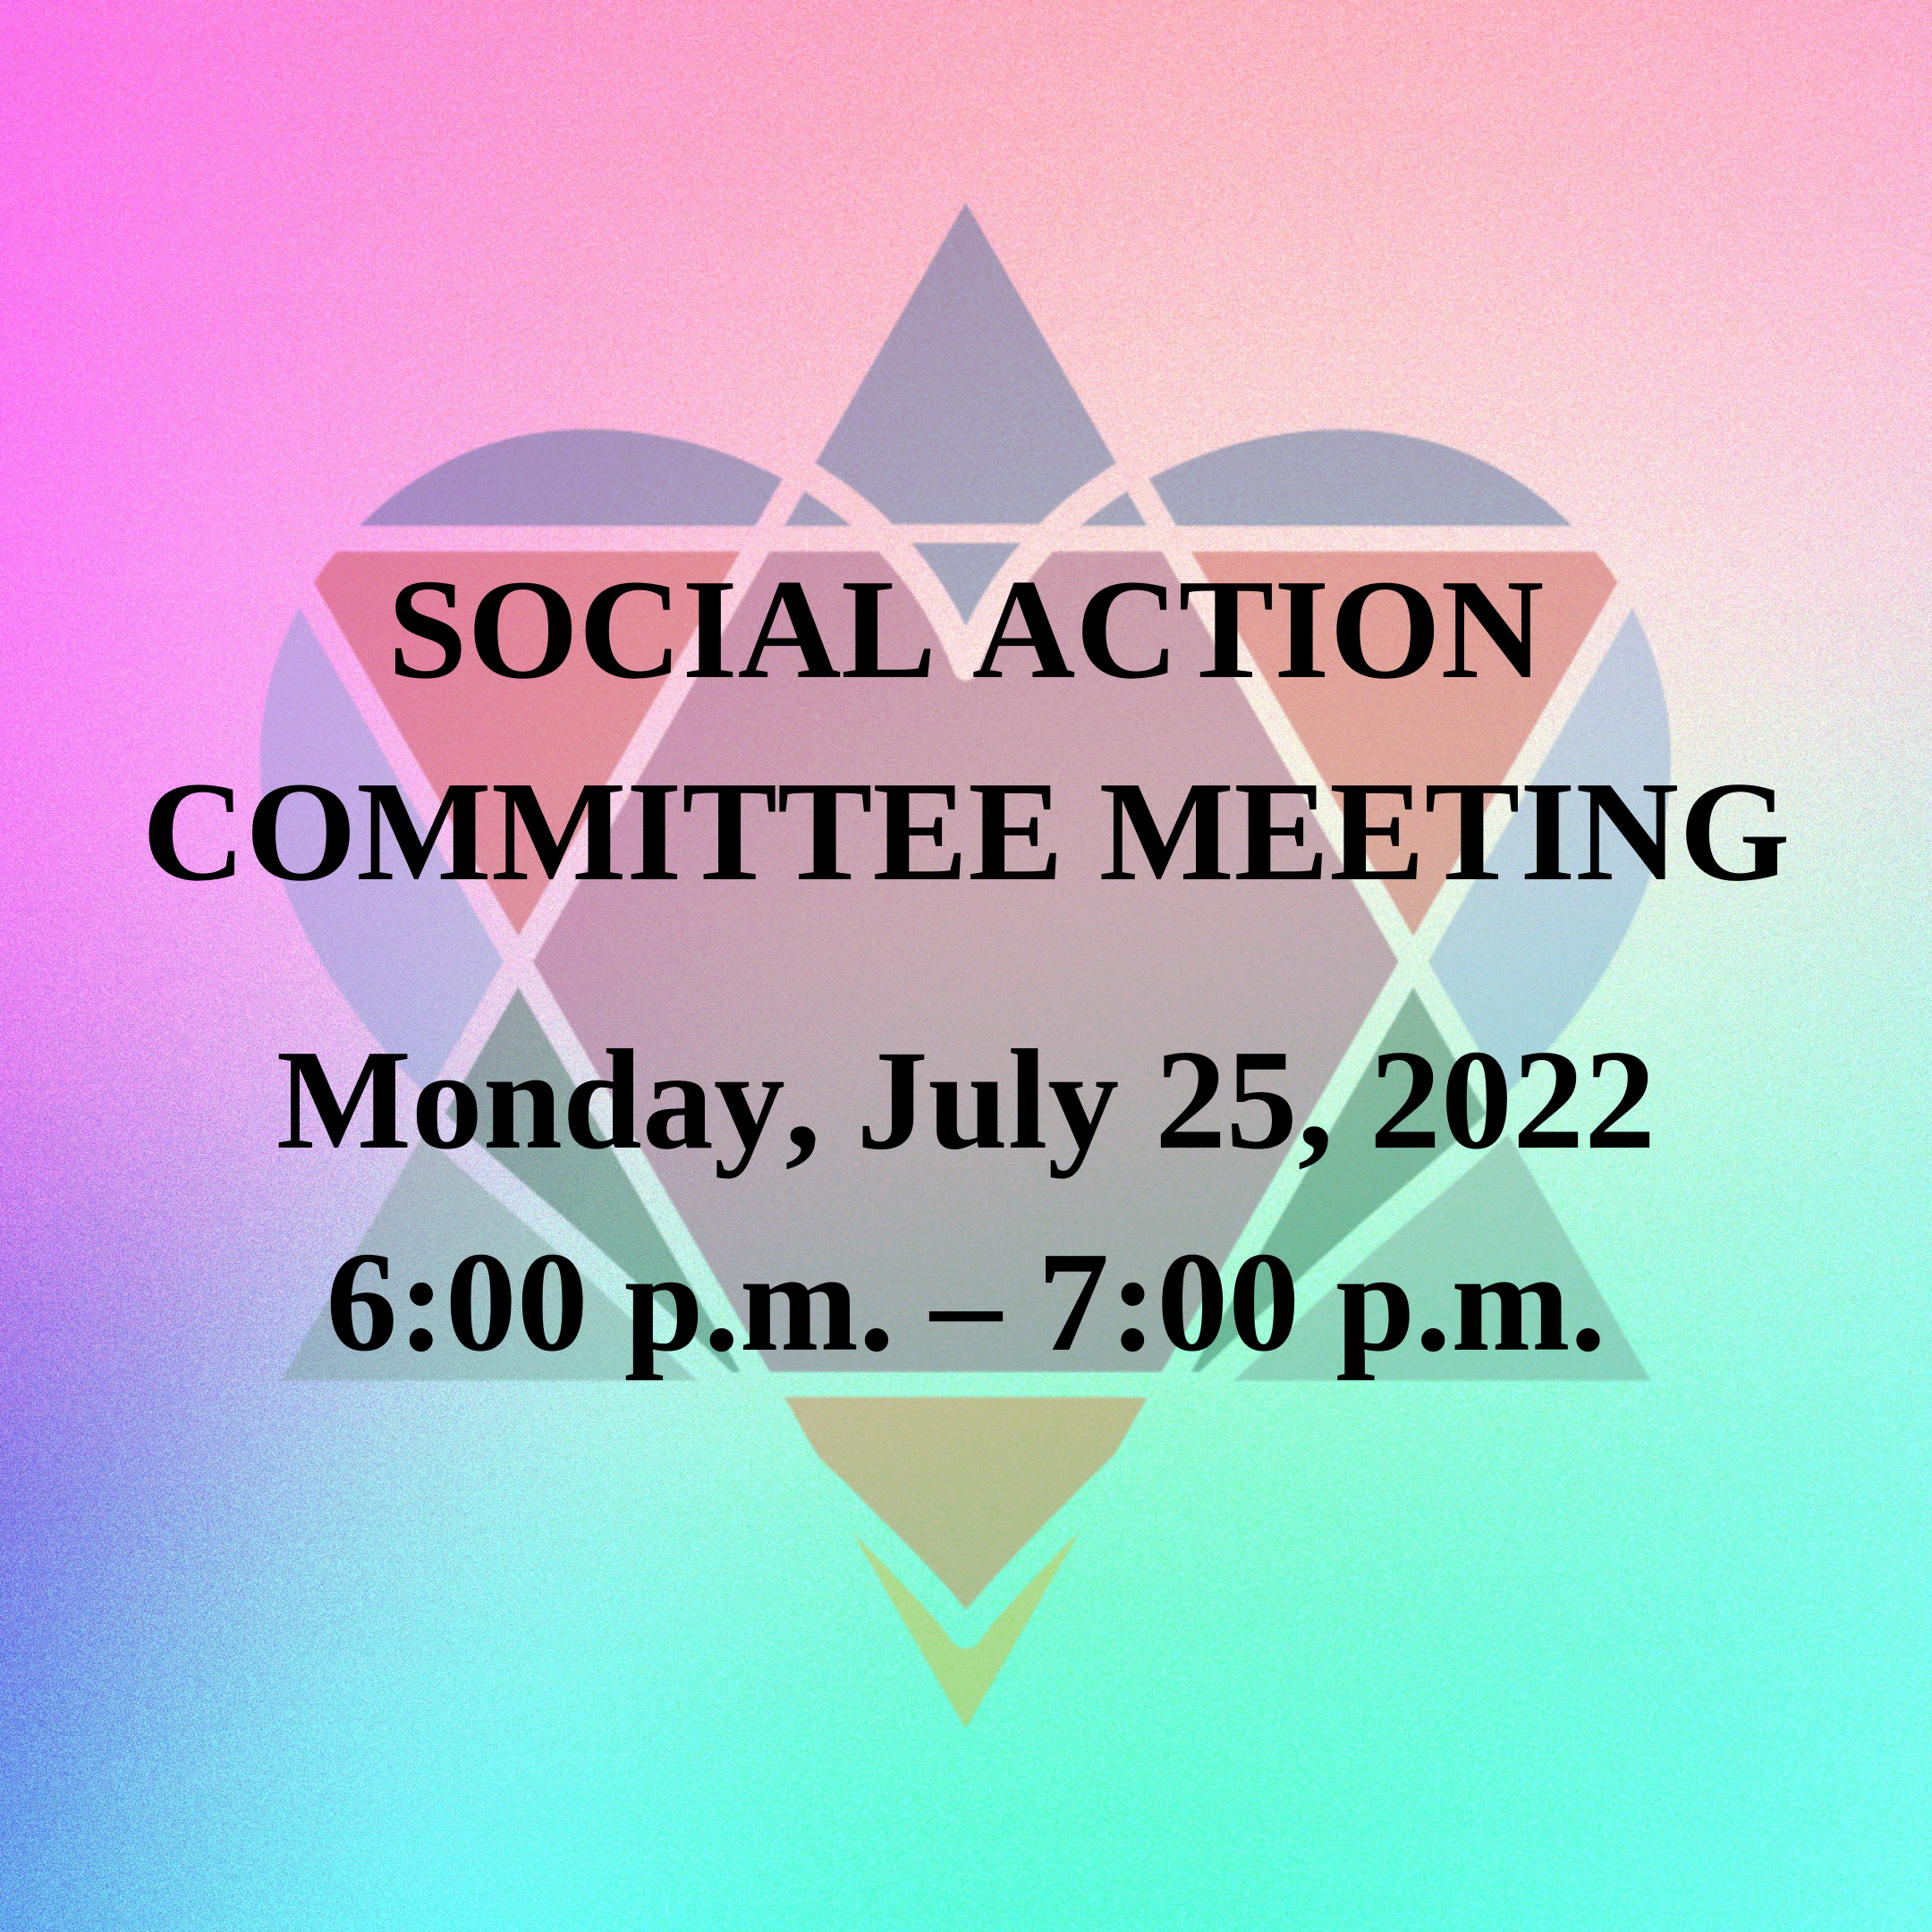 SOCIAL ACTION COMMITTEE MEETING